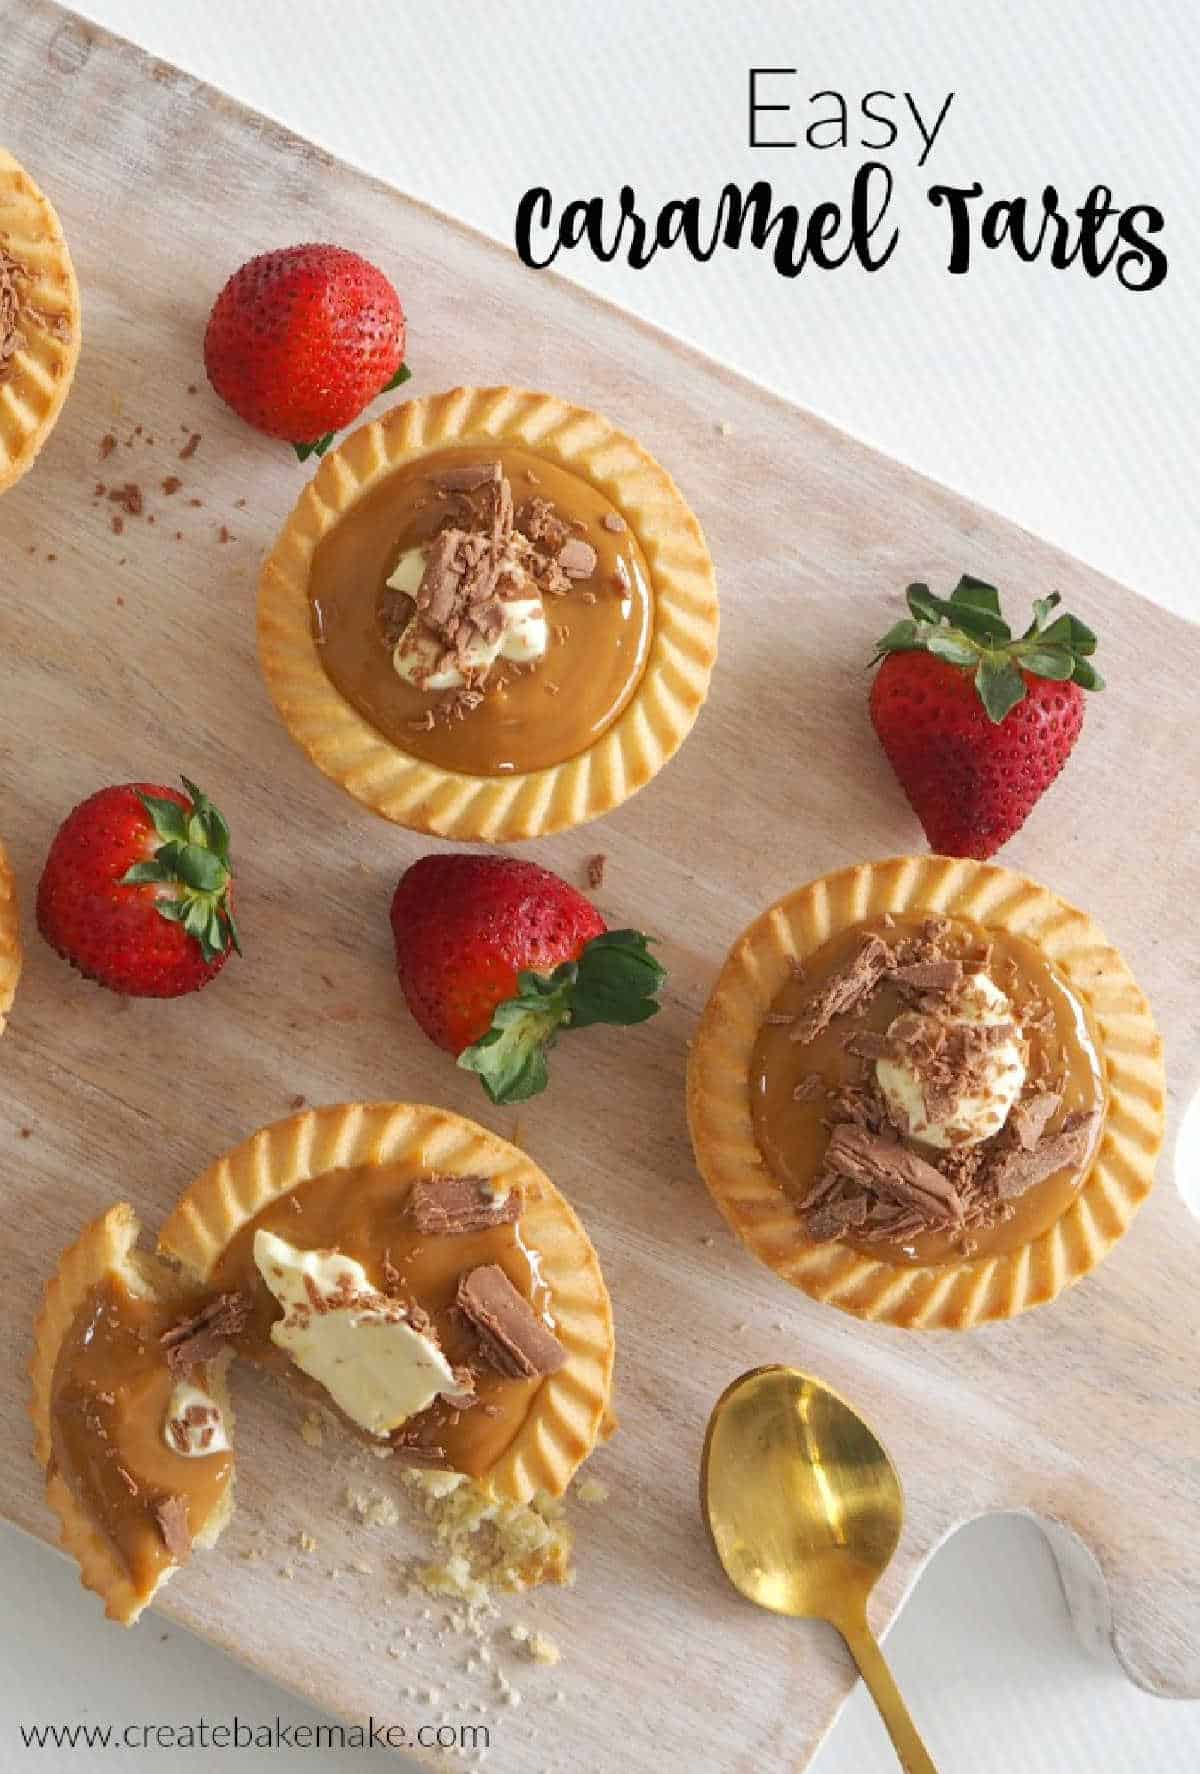 Overhead view of 3 caramel tarts with strawberries on a wooden board